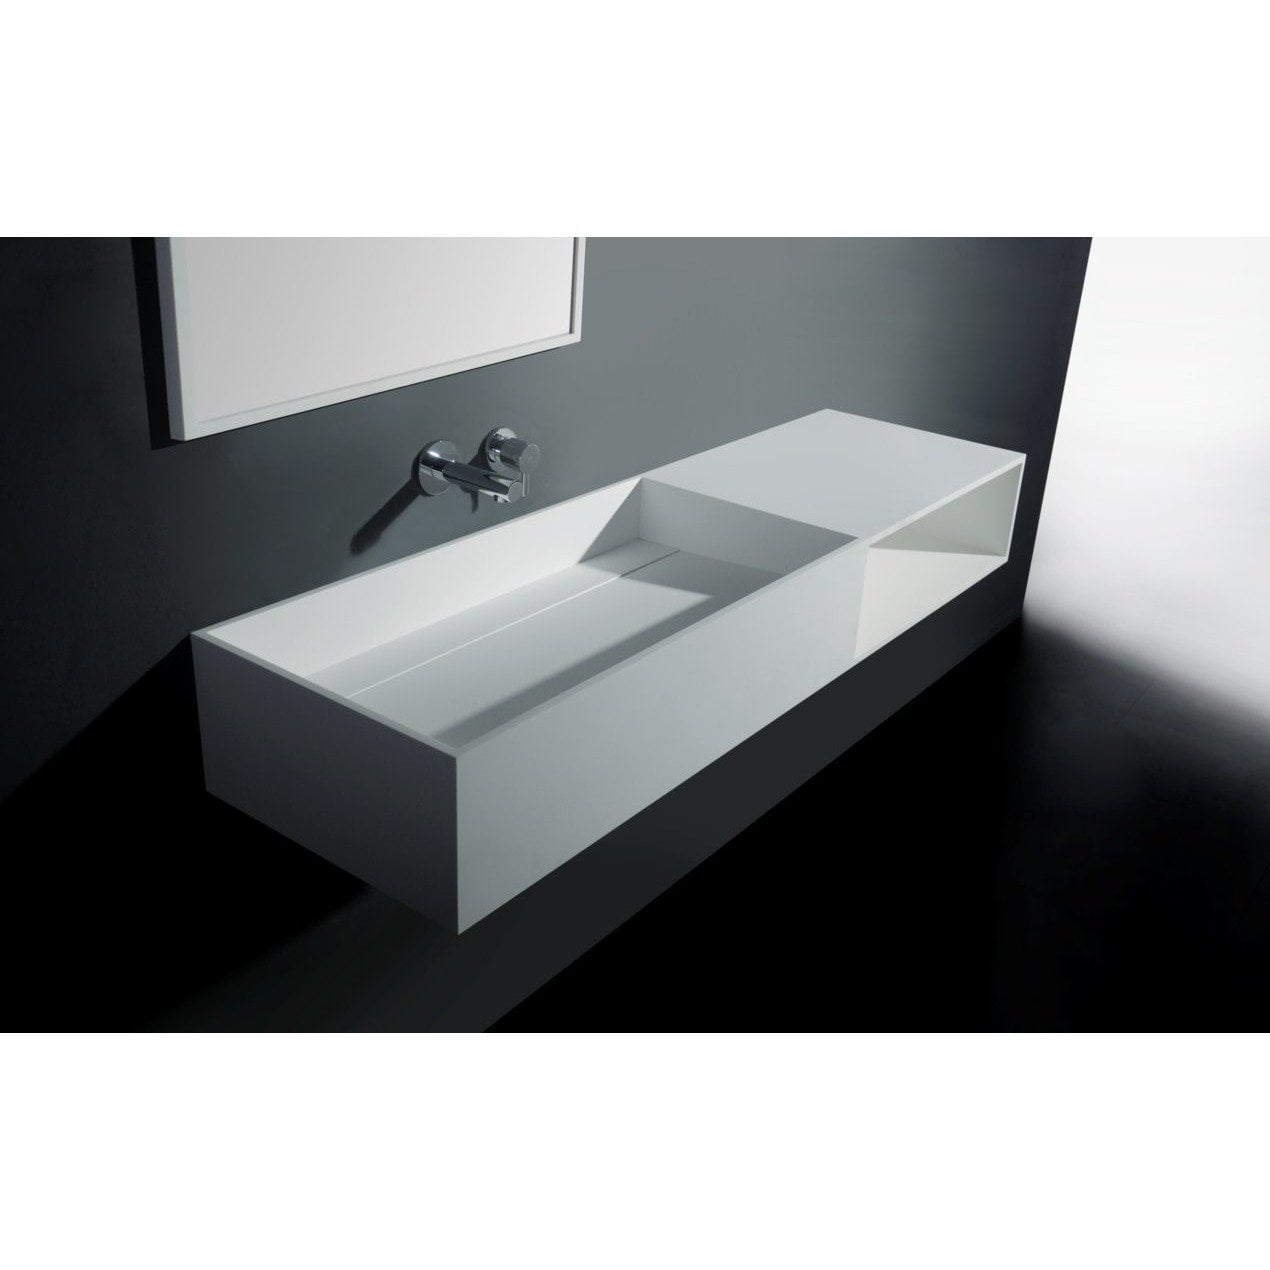 Ideavit 55 Wall Mounted Single Sink Bathroom Vanity With One Shelf White Solid Surface Ideavit Bathroom Vanities And Sink Consoles 1800 00 1900 00 54 To 60 Inches Ideavit No Returns Single Sink Solid